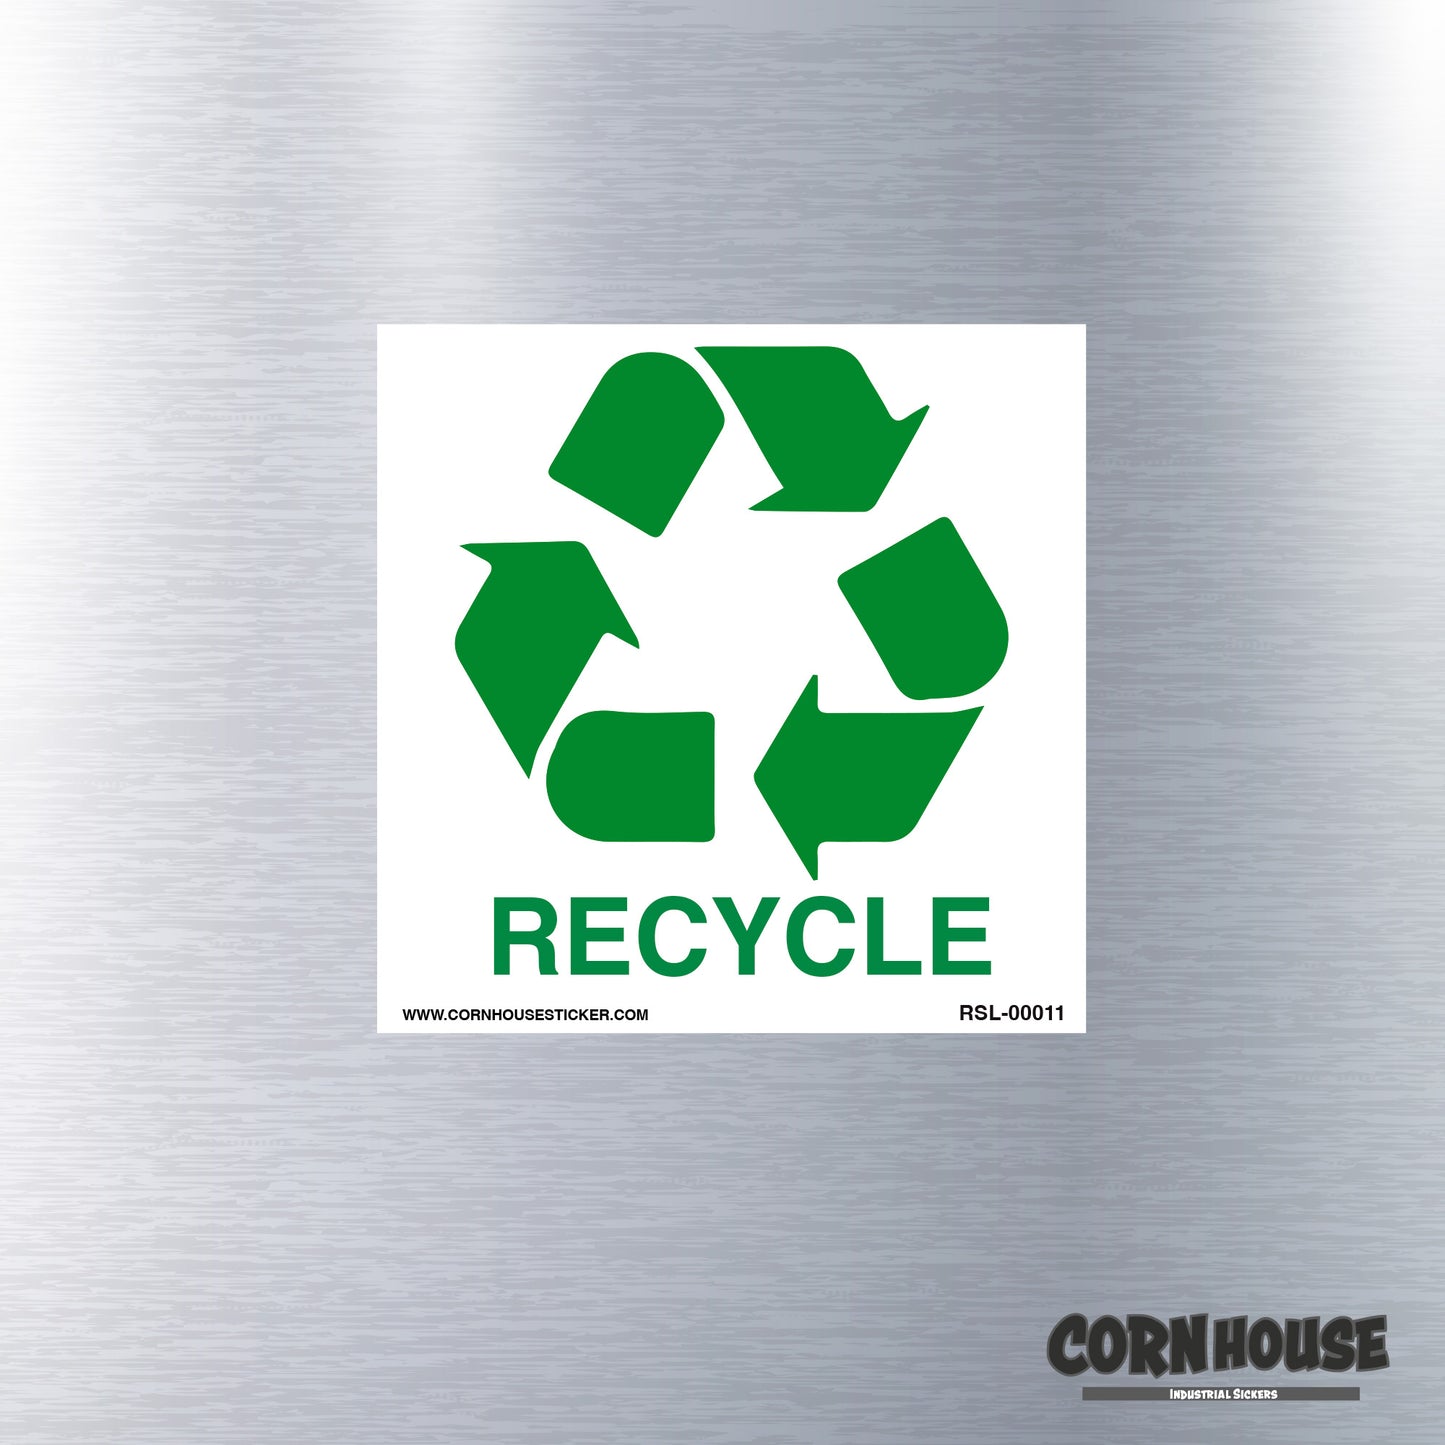 Recycle sticker decal